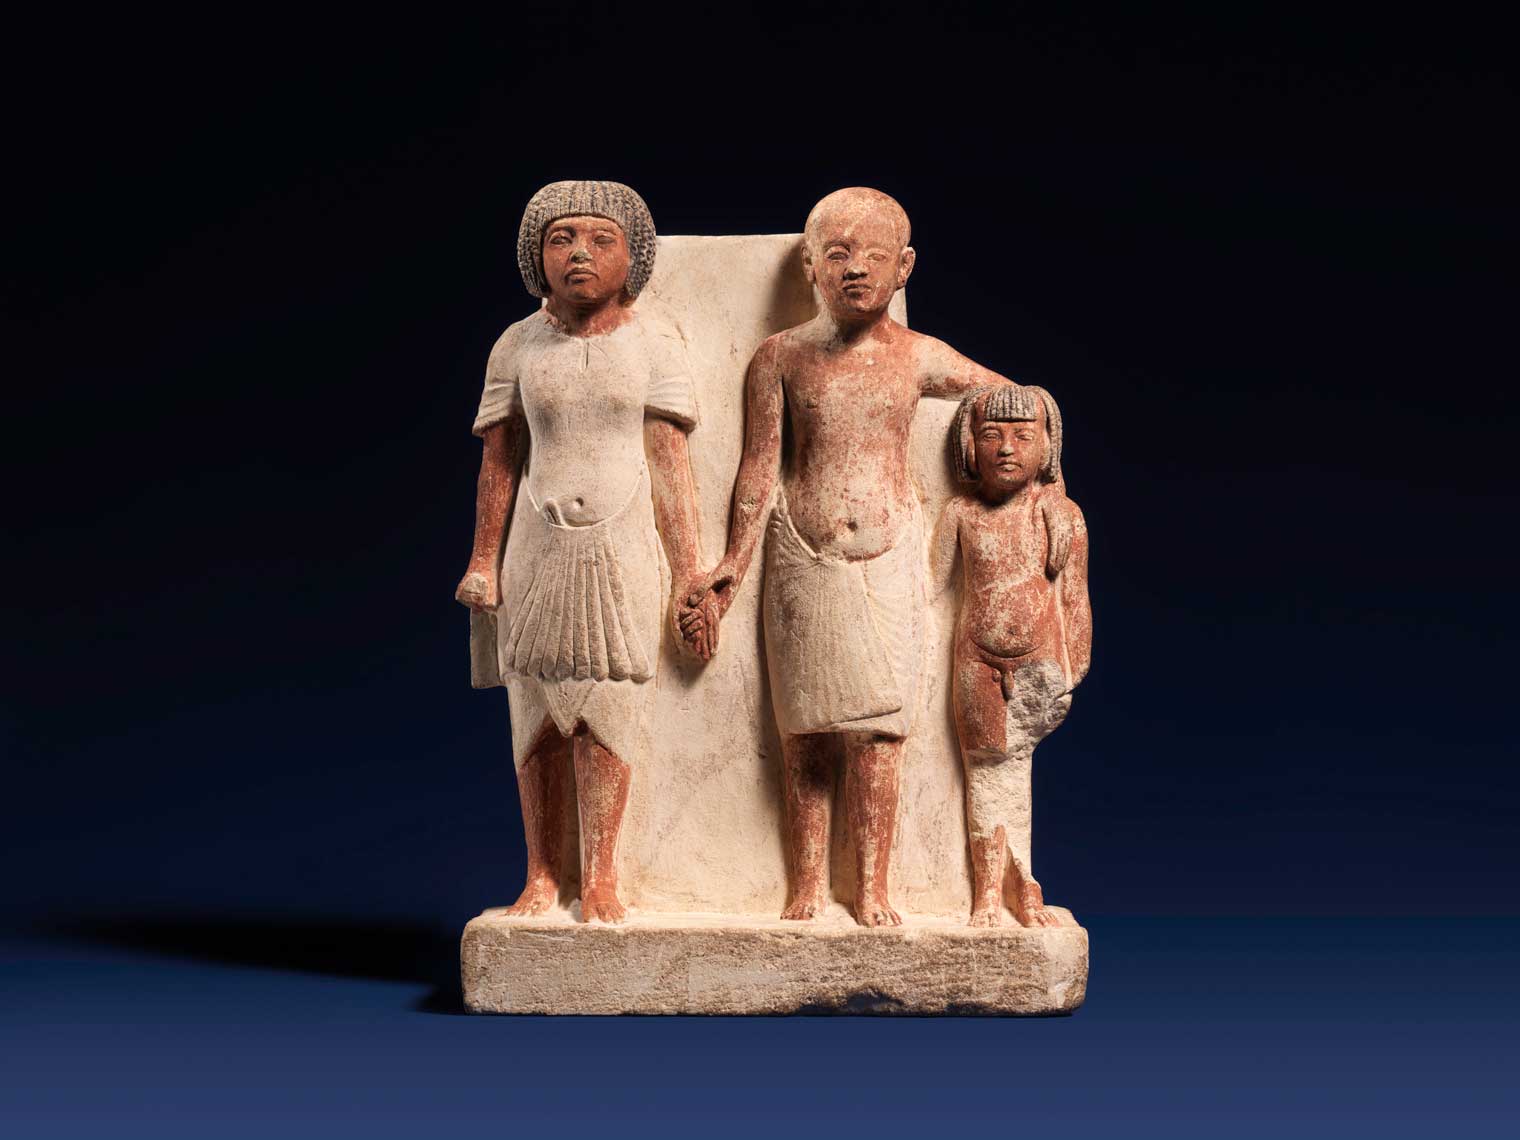 A limestone statue of two men and a boy standing side-by-side and holding hands